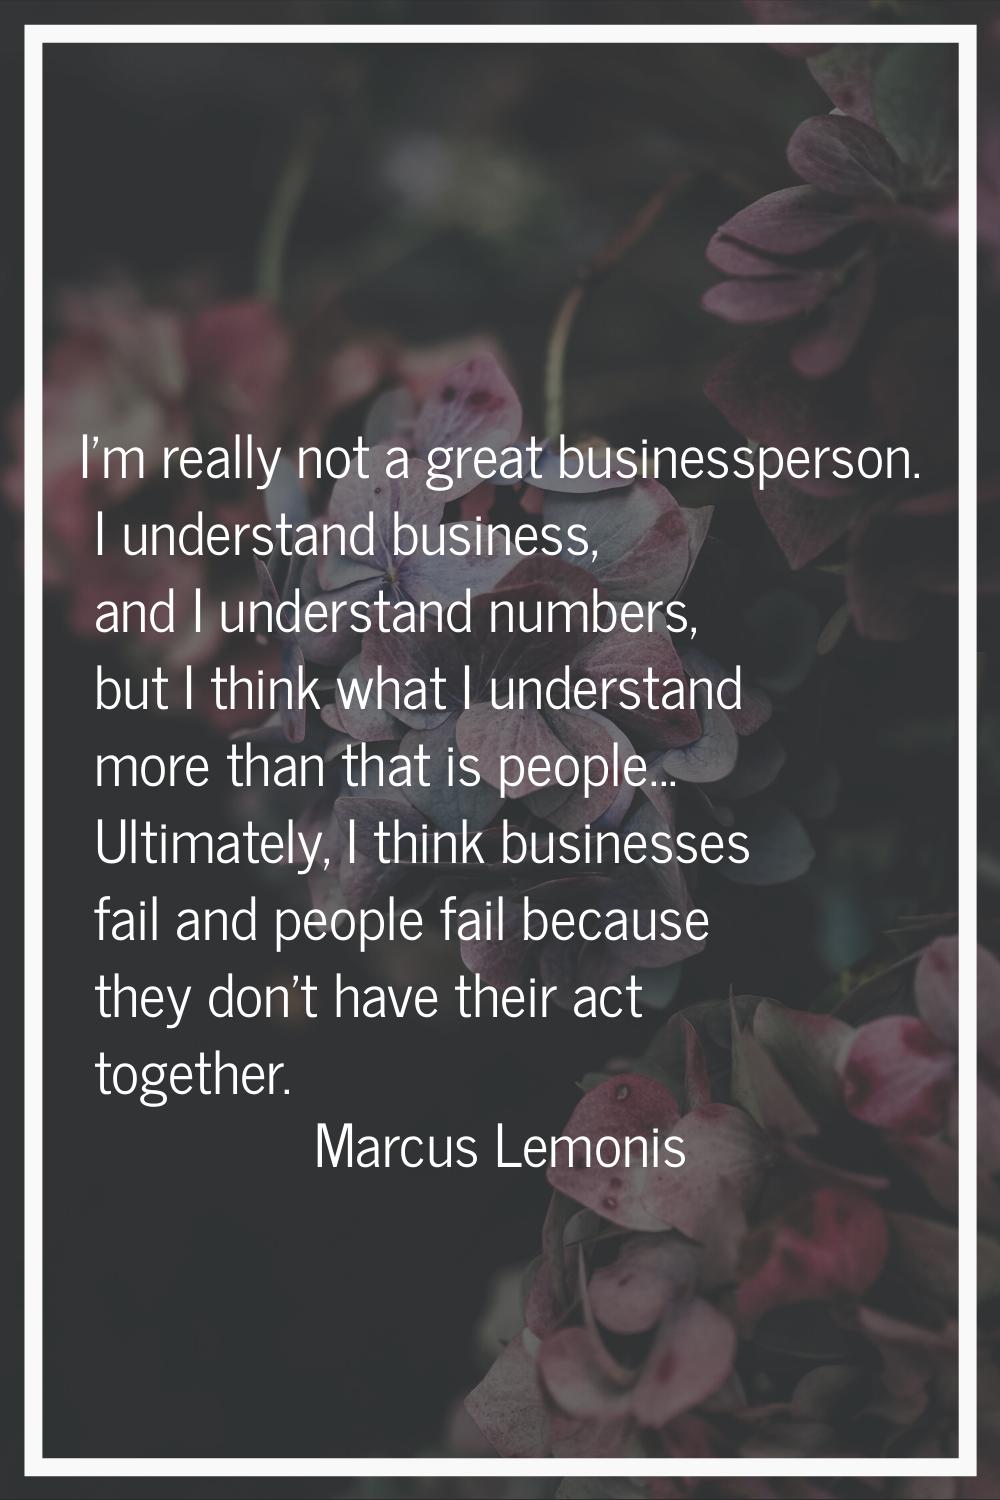 I'm really not a great businessperson. I understand business, and I understand numbers, but I think